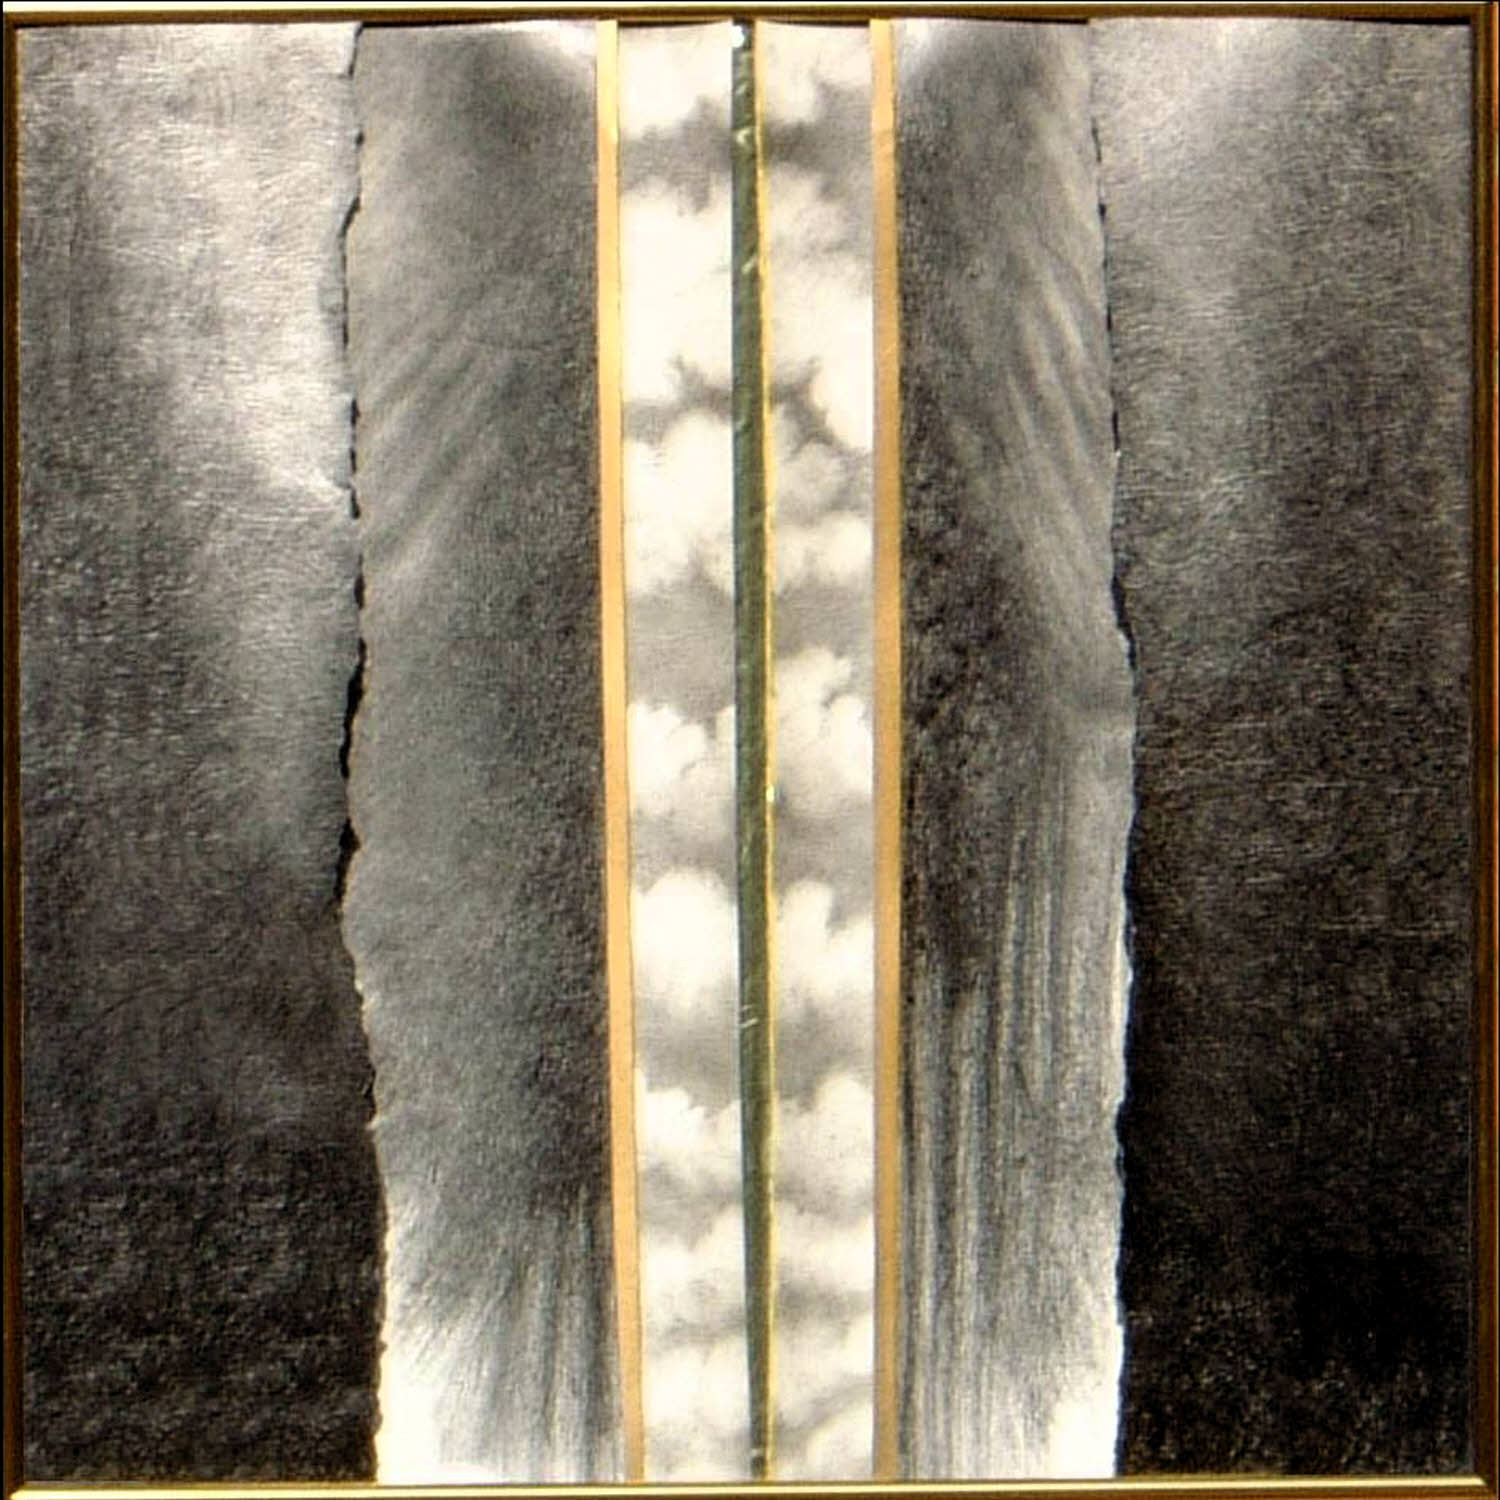 Gold III, 2001, graphite on torn paper, collage, 20x20 inches